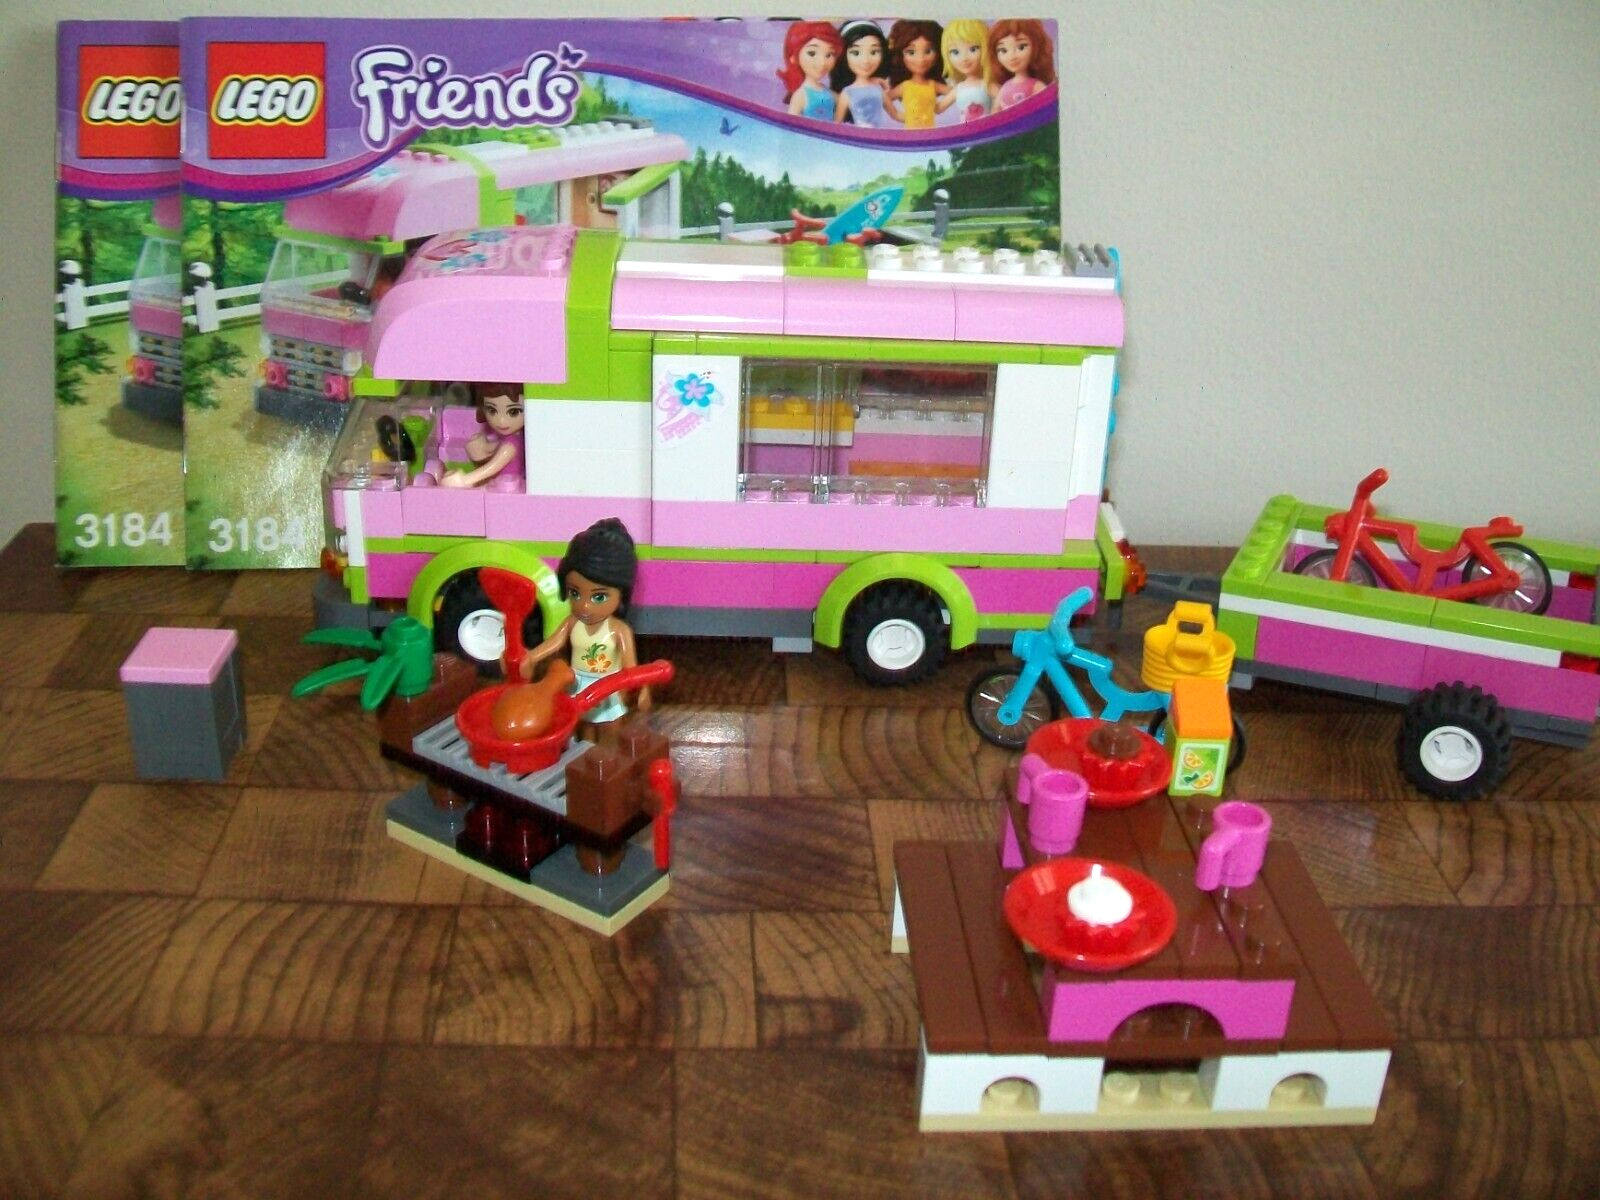 LEGO Friends  #3184 "Adventure Camper" - 100% Complete with Manual